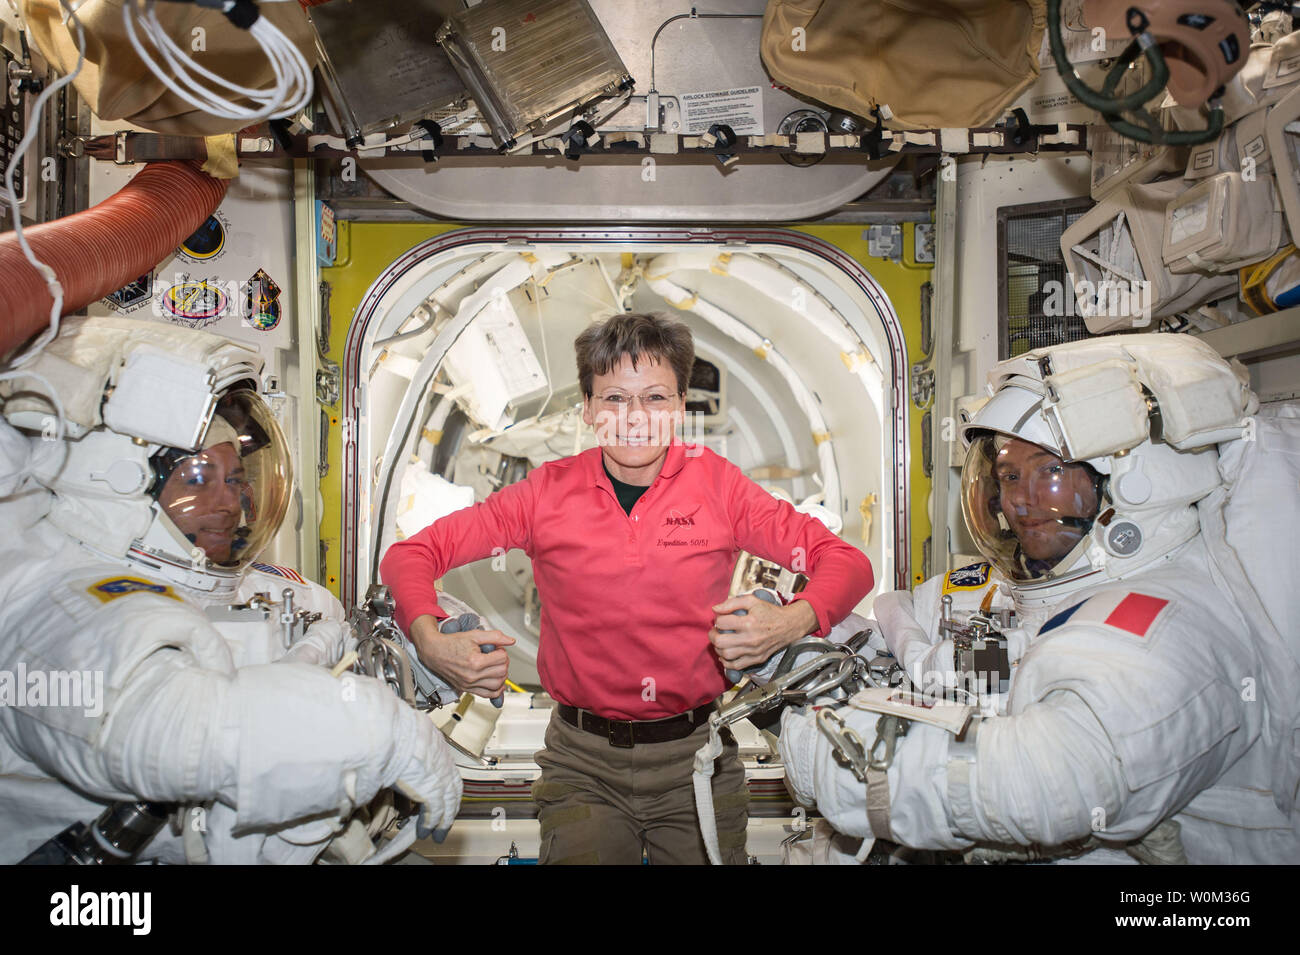 NASA astronaut Peggy Whitson (middle) poses with Expedition 50 Commander Shane Kimbrough of NASA (left) and Flight Engineer Thomas Pesquet of ESA (European Space Agency) (right) prior to their spacewalk on March 24, 2017. On Monday, April 24, 2017, astronaut Peggy Whitson broke the 534-day record set by Jeff Williams for the total time spent in space by an American. Whitson is also the first woman to command the International Space Station (ISS) twice as well as holding the record for the most spacewalks conducted by a woman astronaut. NASA/UPI Stock Photo